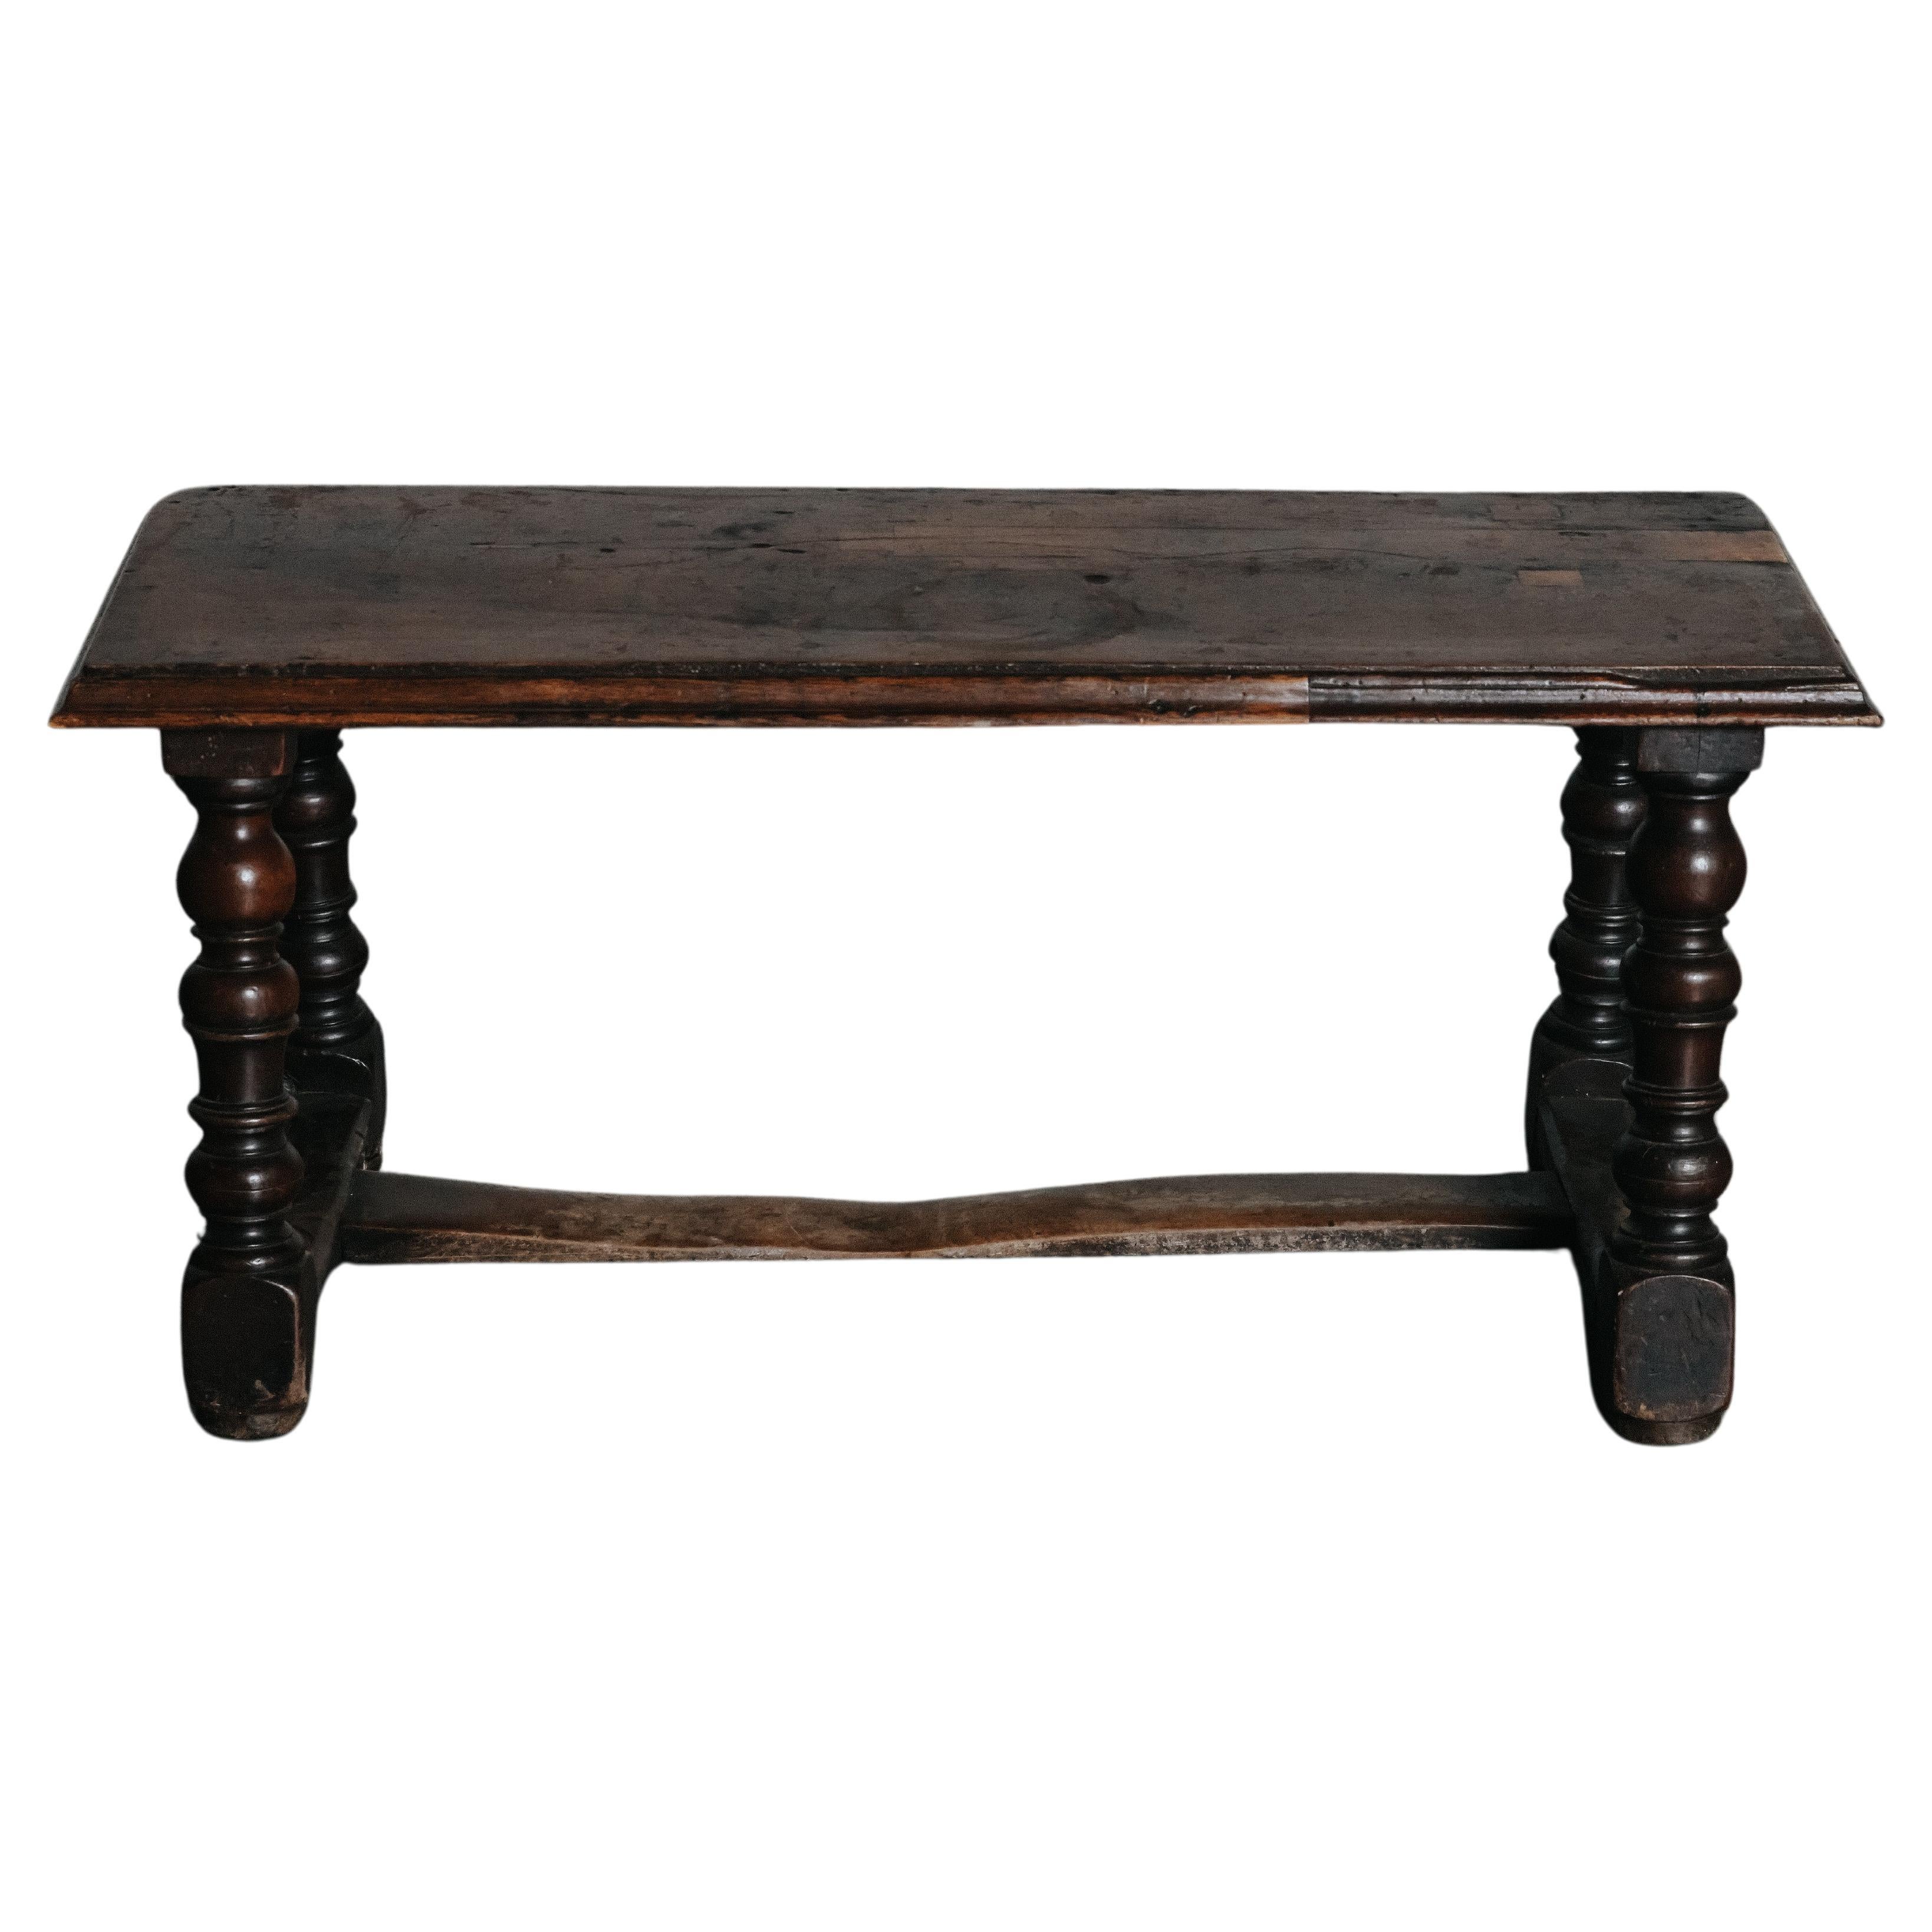 Early Walnut Side Table From Italy, Circa 1800 For Sale